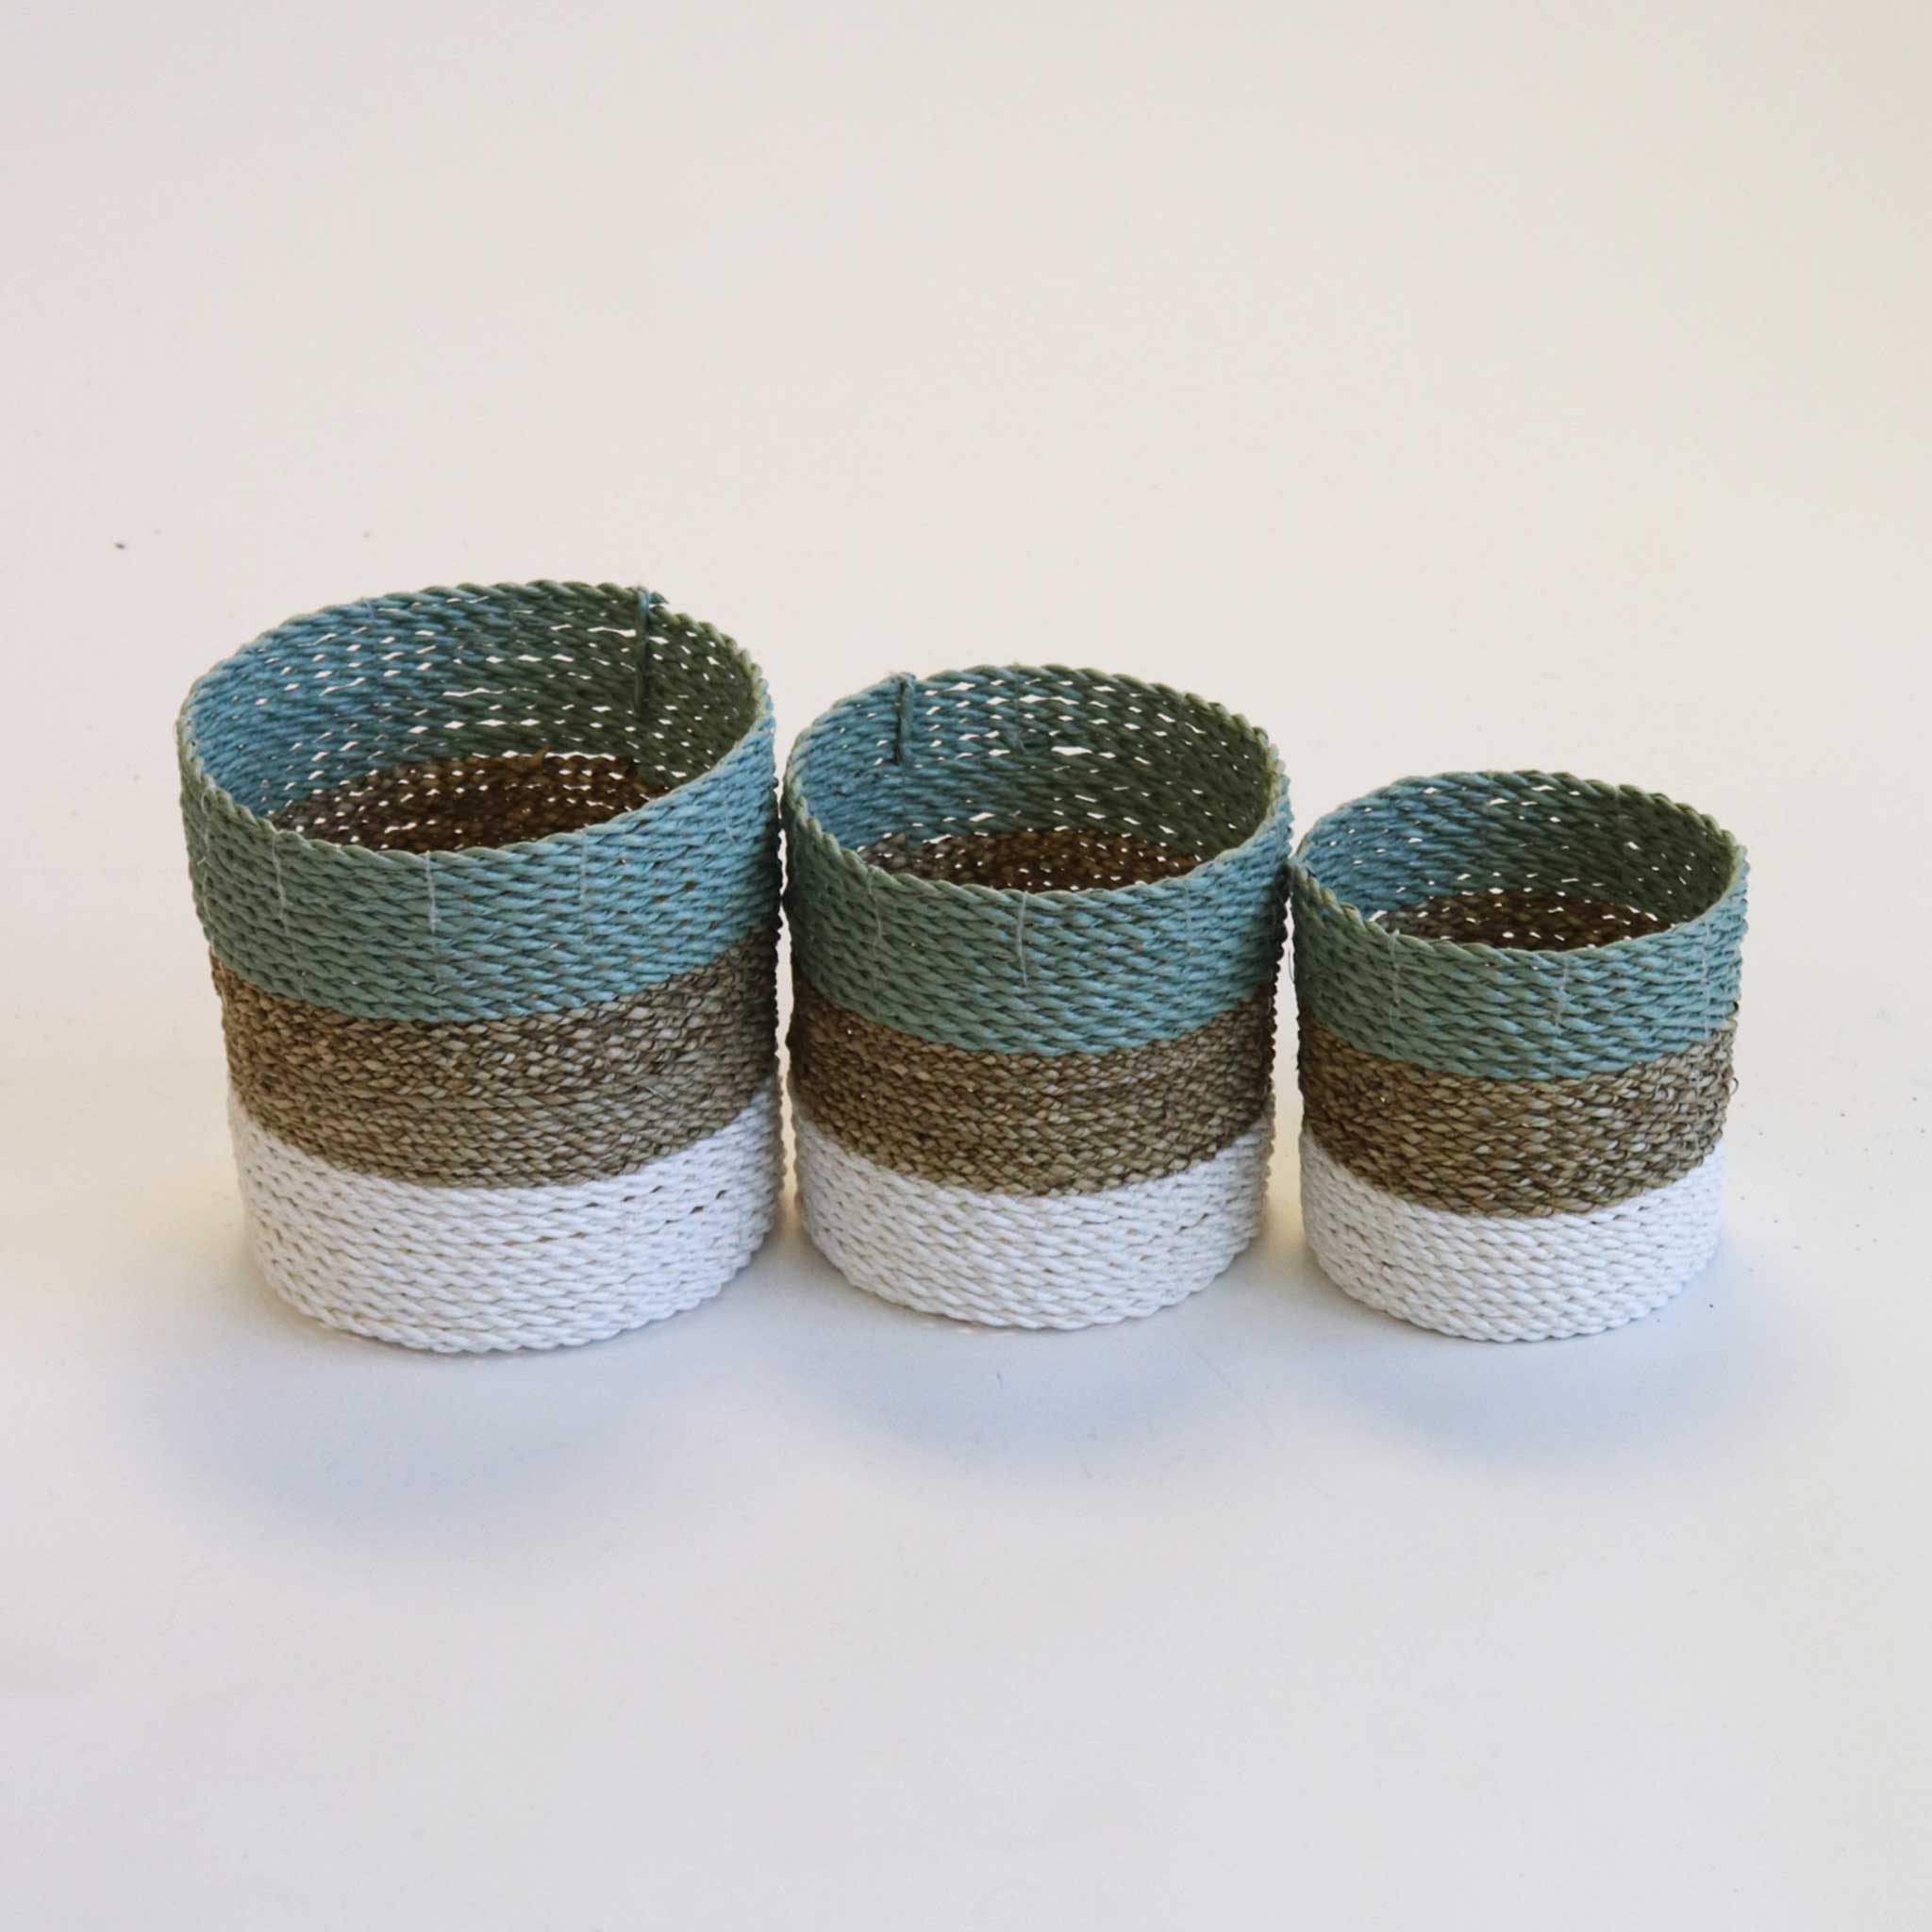 Small Green, Natural and White Baskets